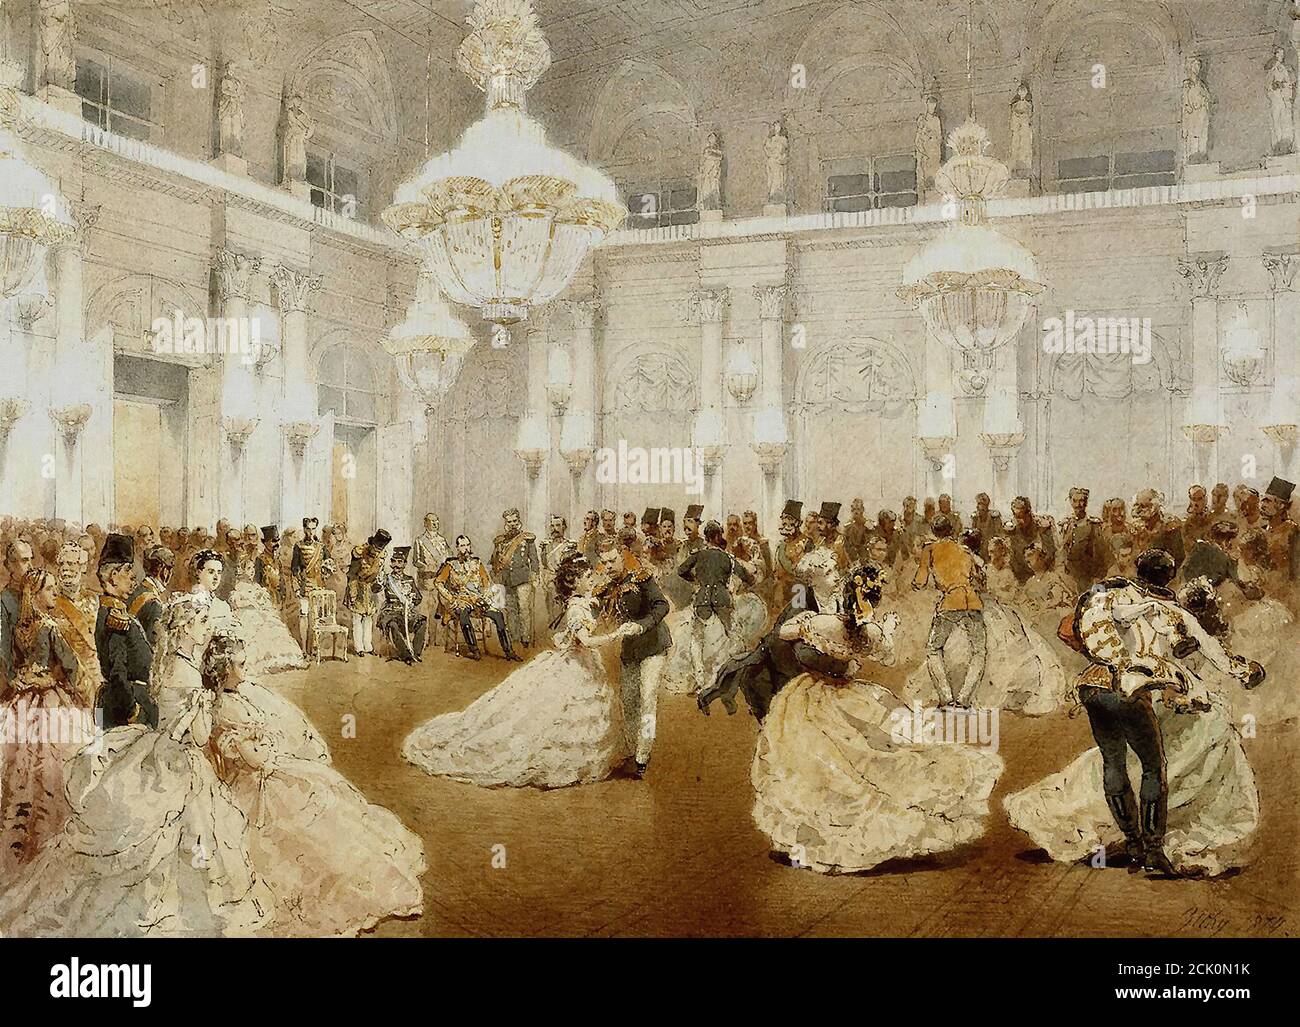 zichy, mihaly von - Ball in the Concert Hall of the Winter Palace during the Official Visit of Nasir al-Din Shah in May 1873 - 35496039682 ef447ba7cb o Stock Photo